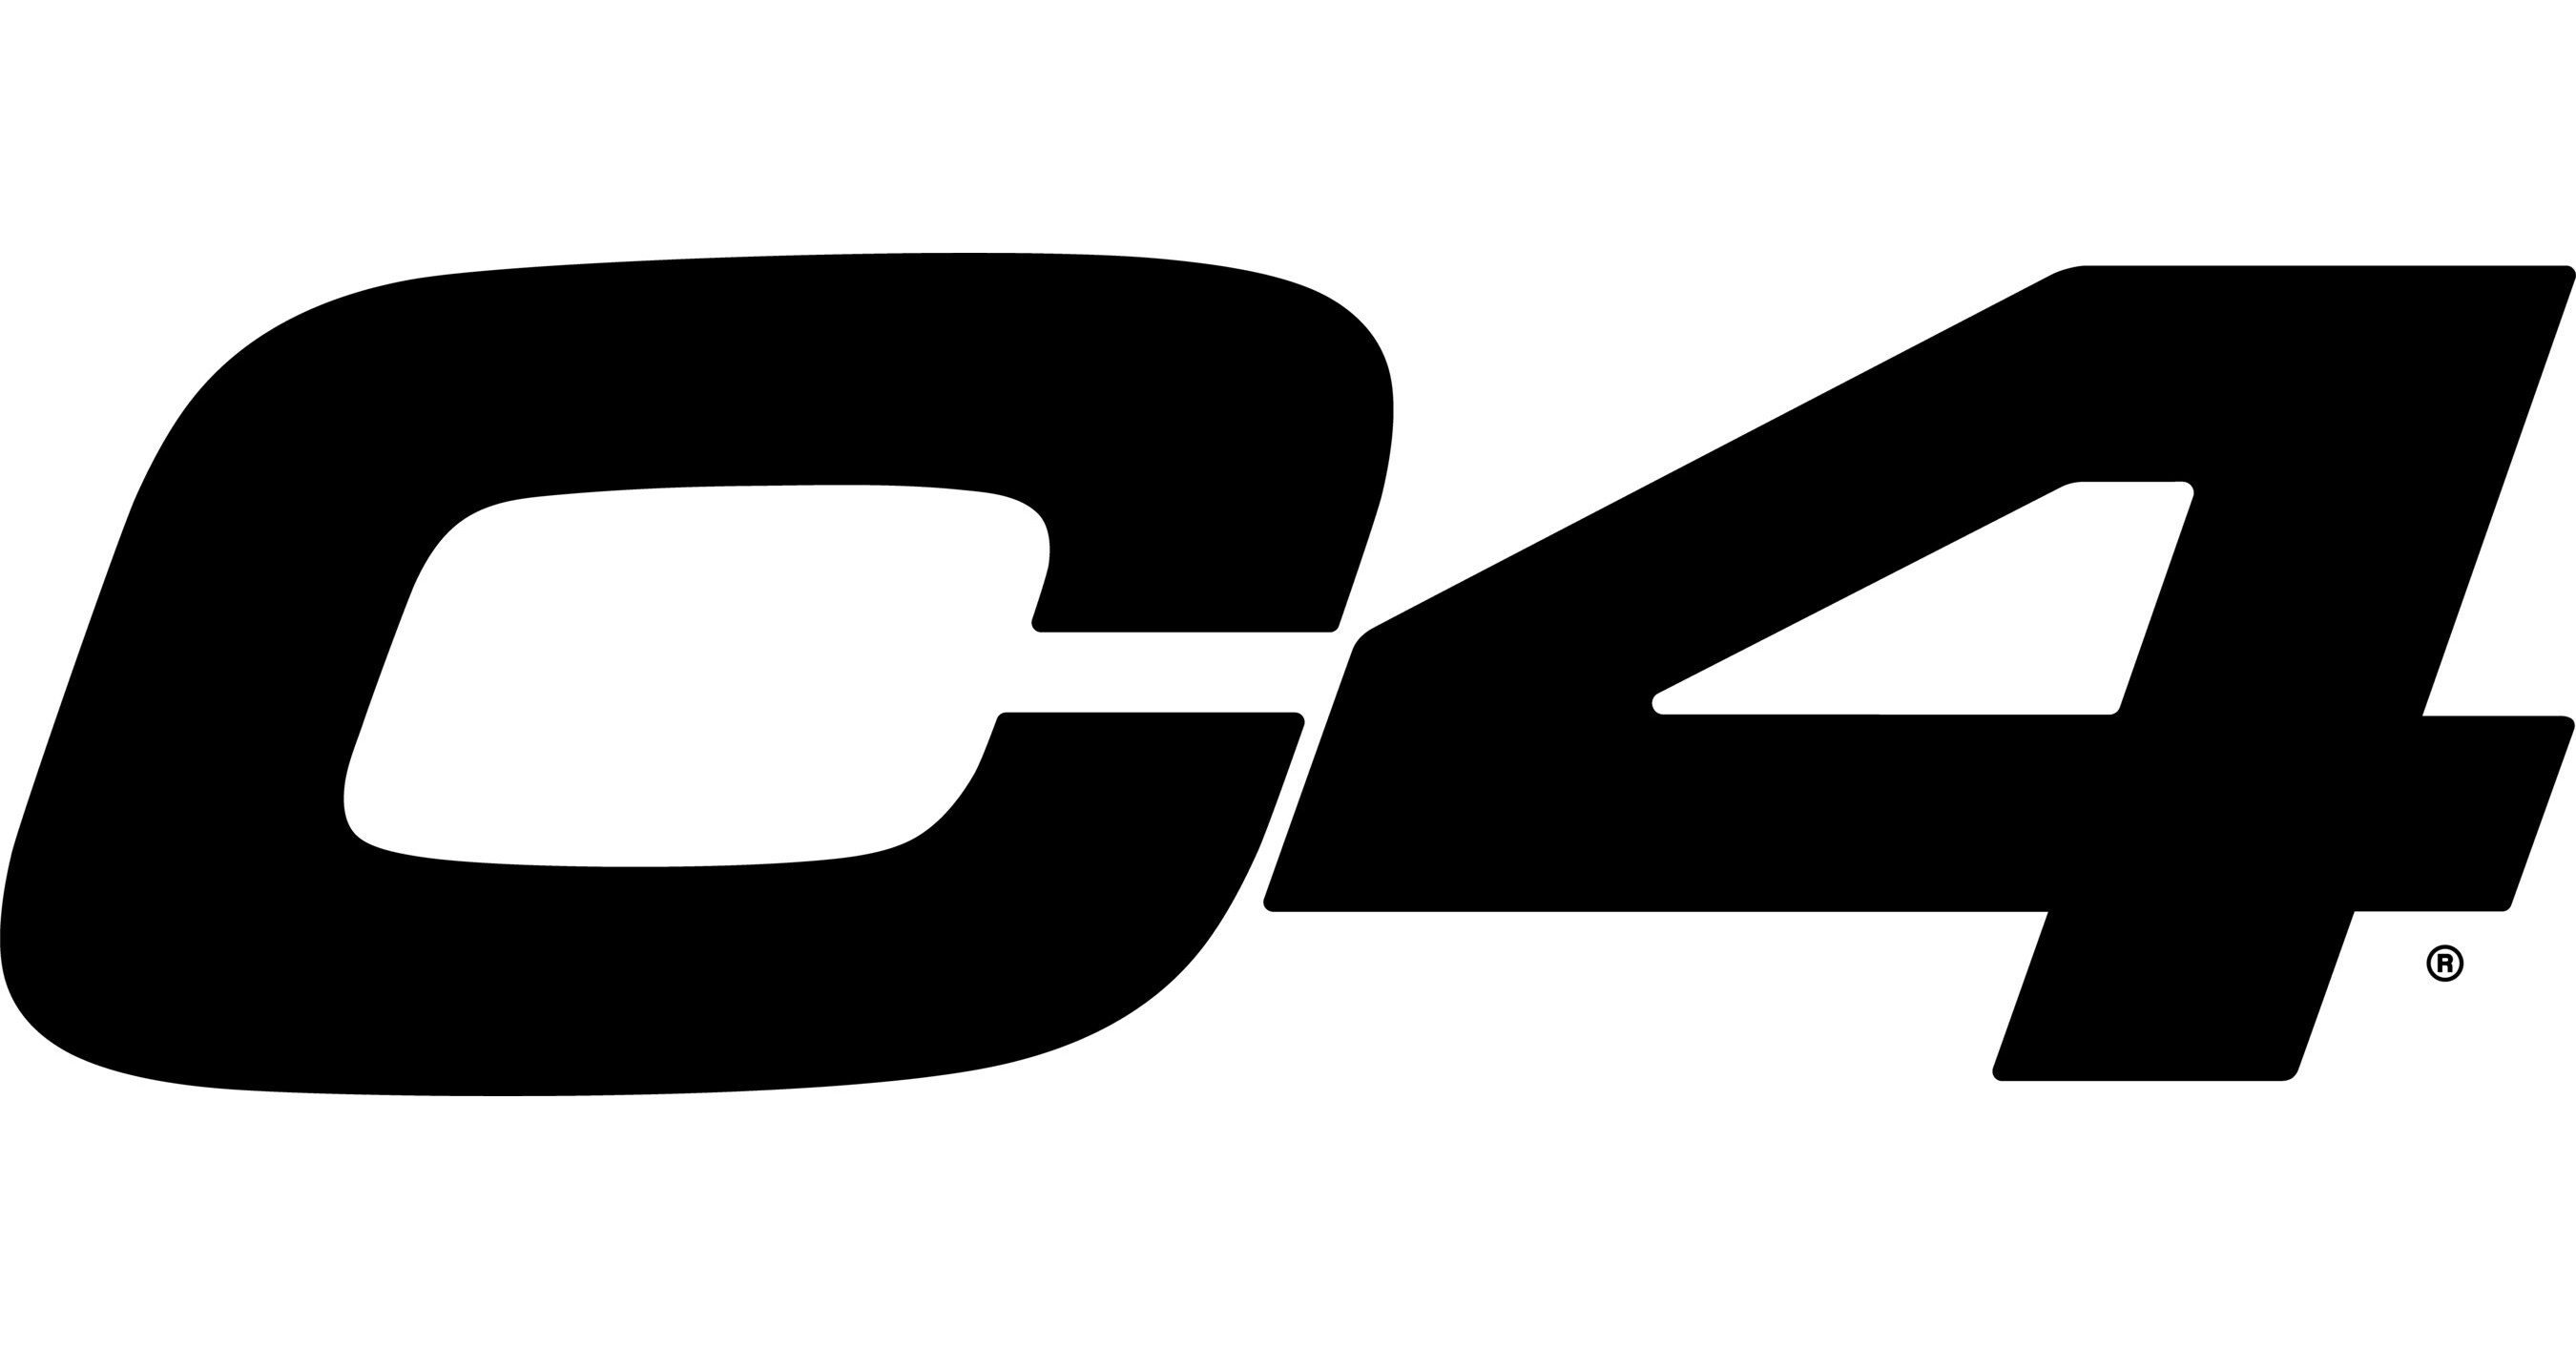 C4 RECLAIMS ITS THRONE WITH ITS HARDEST HITTING PRE-WORKOUT LINE EVER